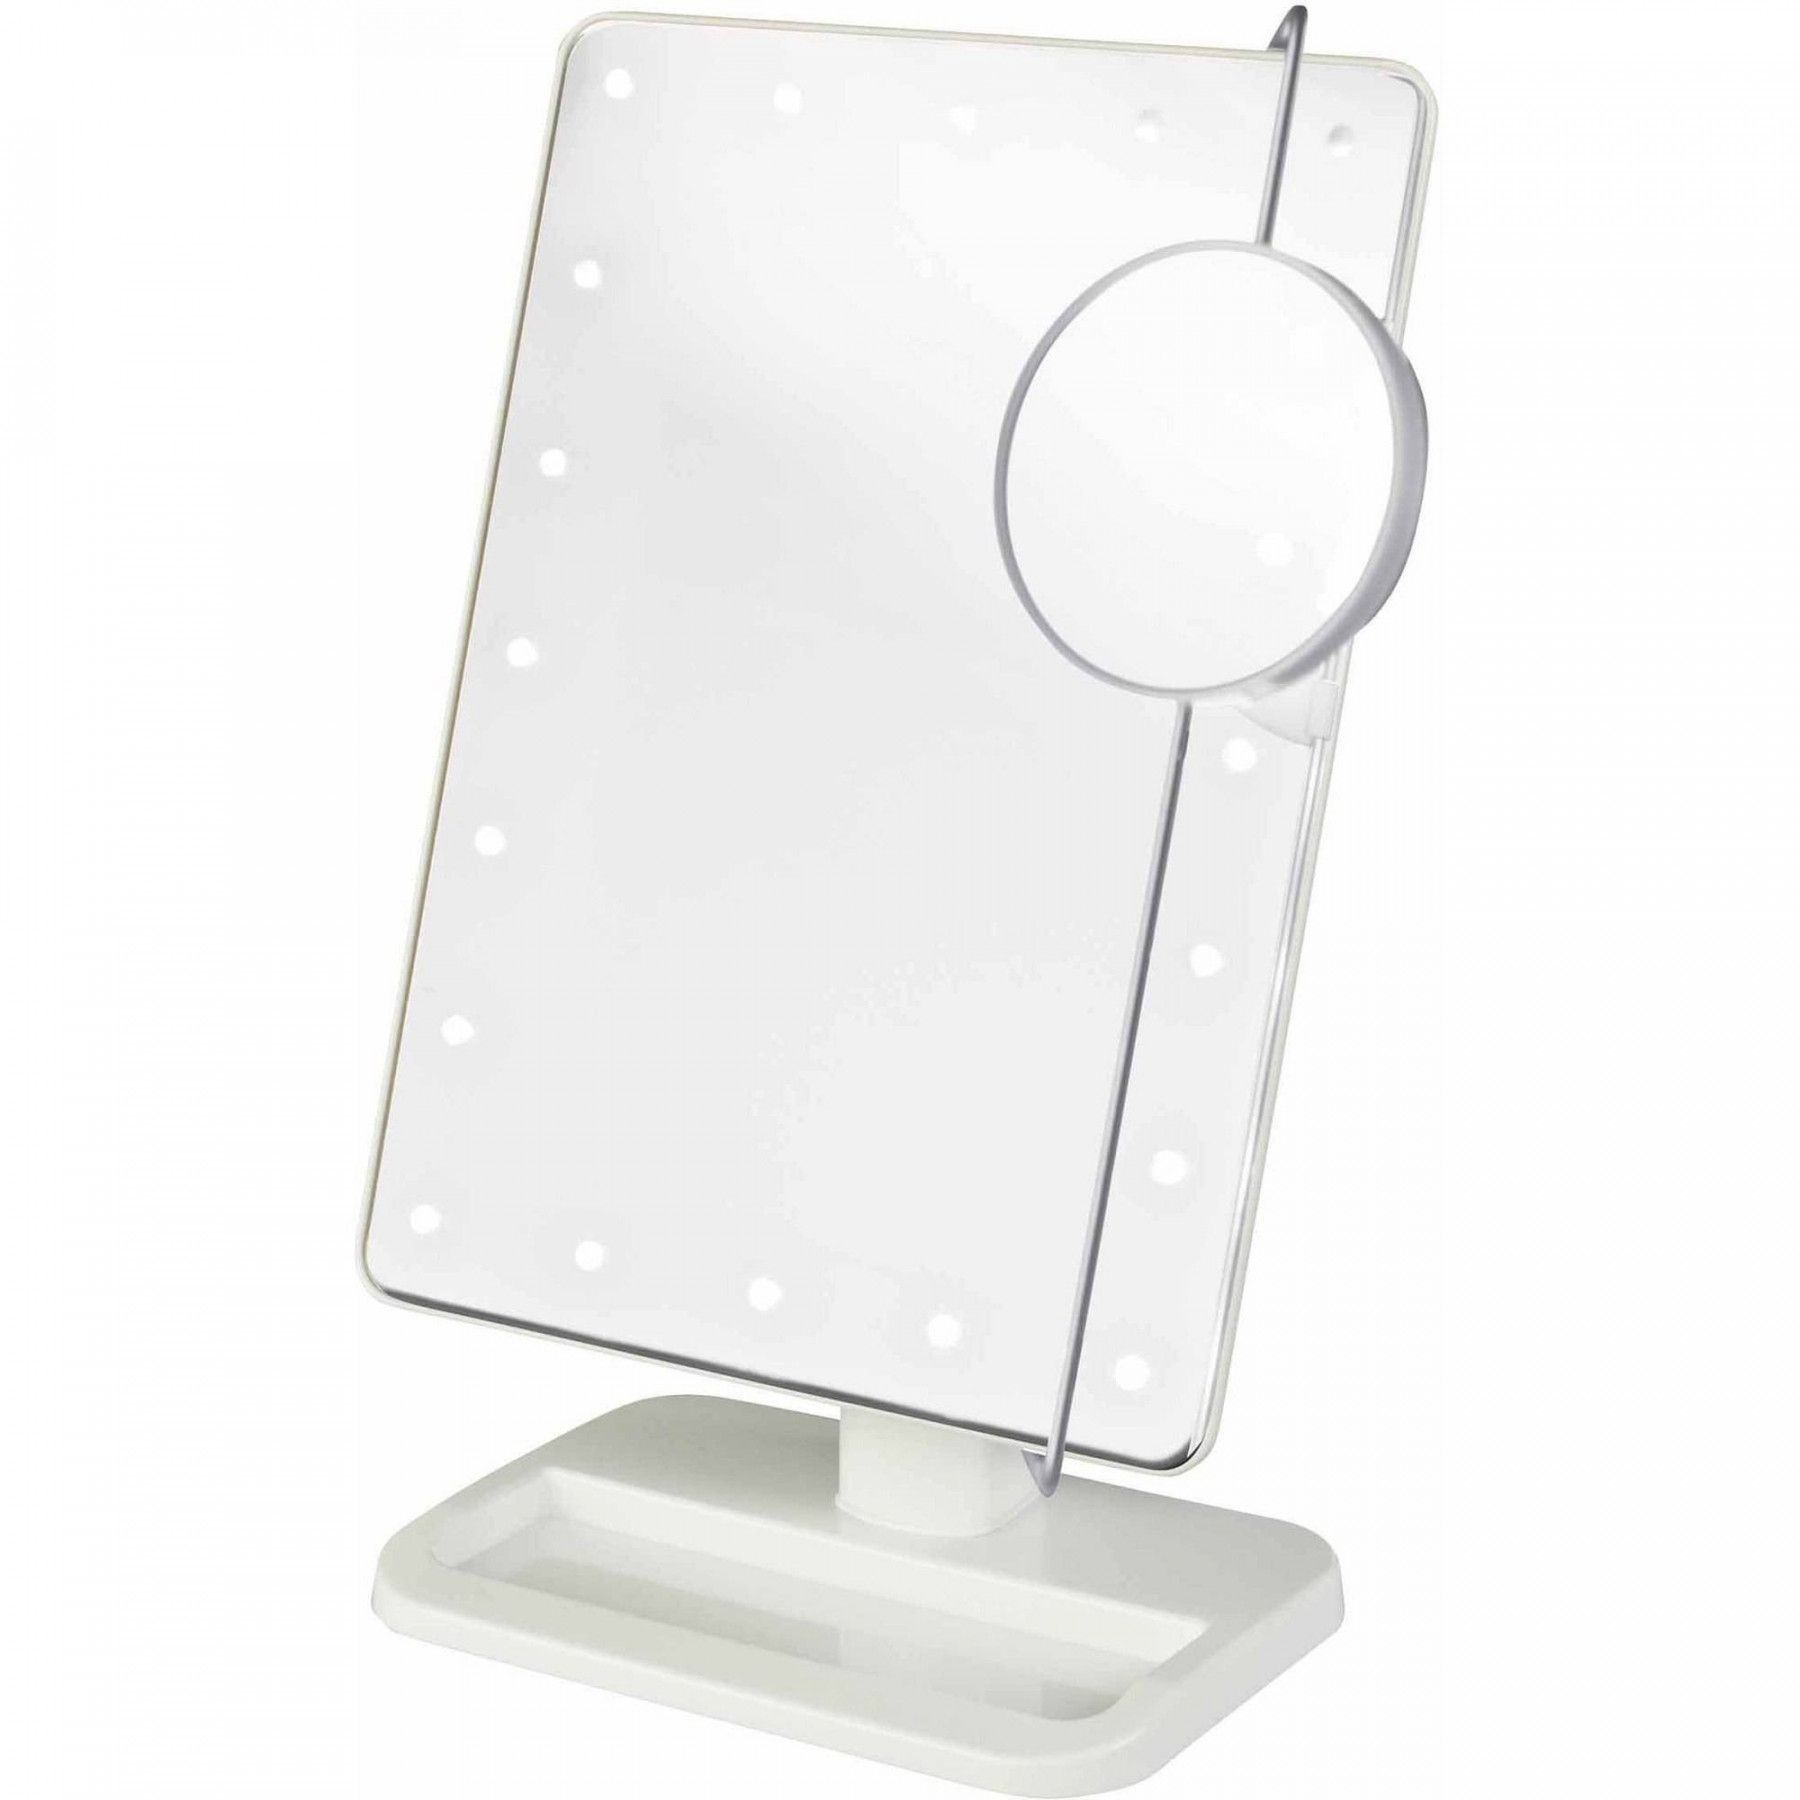 Jerdon Style Js811W Led Lighted Makeup Mirror Includes 10X | Makeup Within Led Lighted Makeup Mirrors (View 8 of 15)